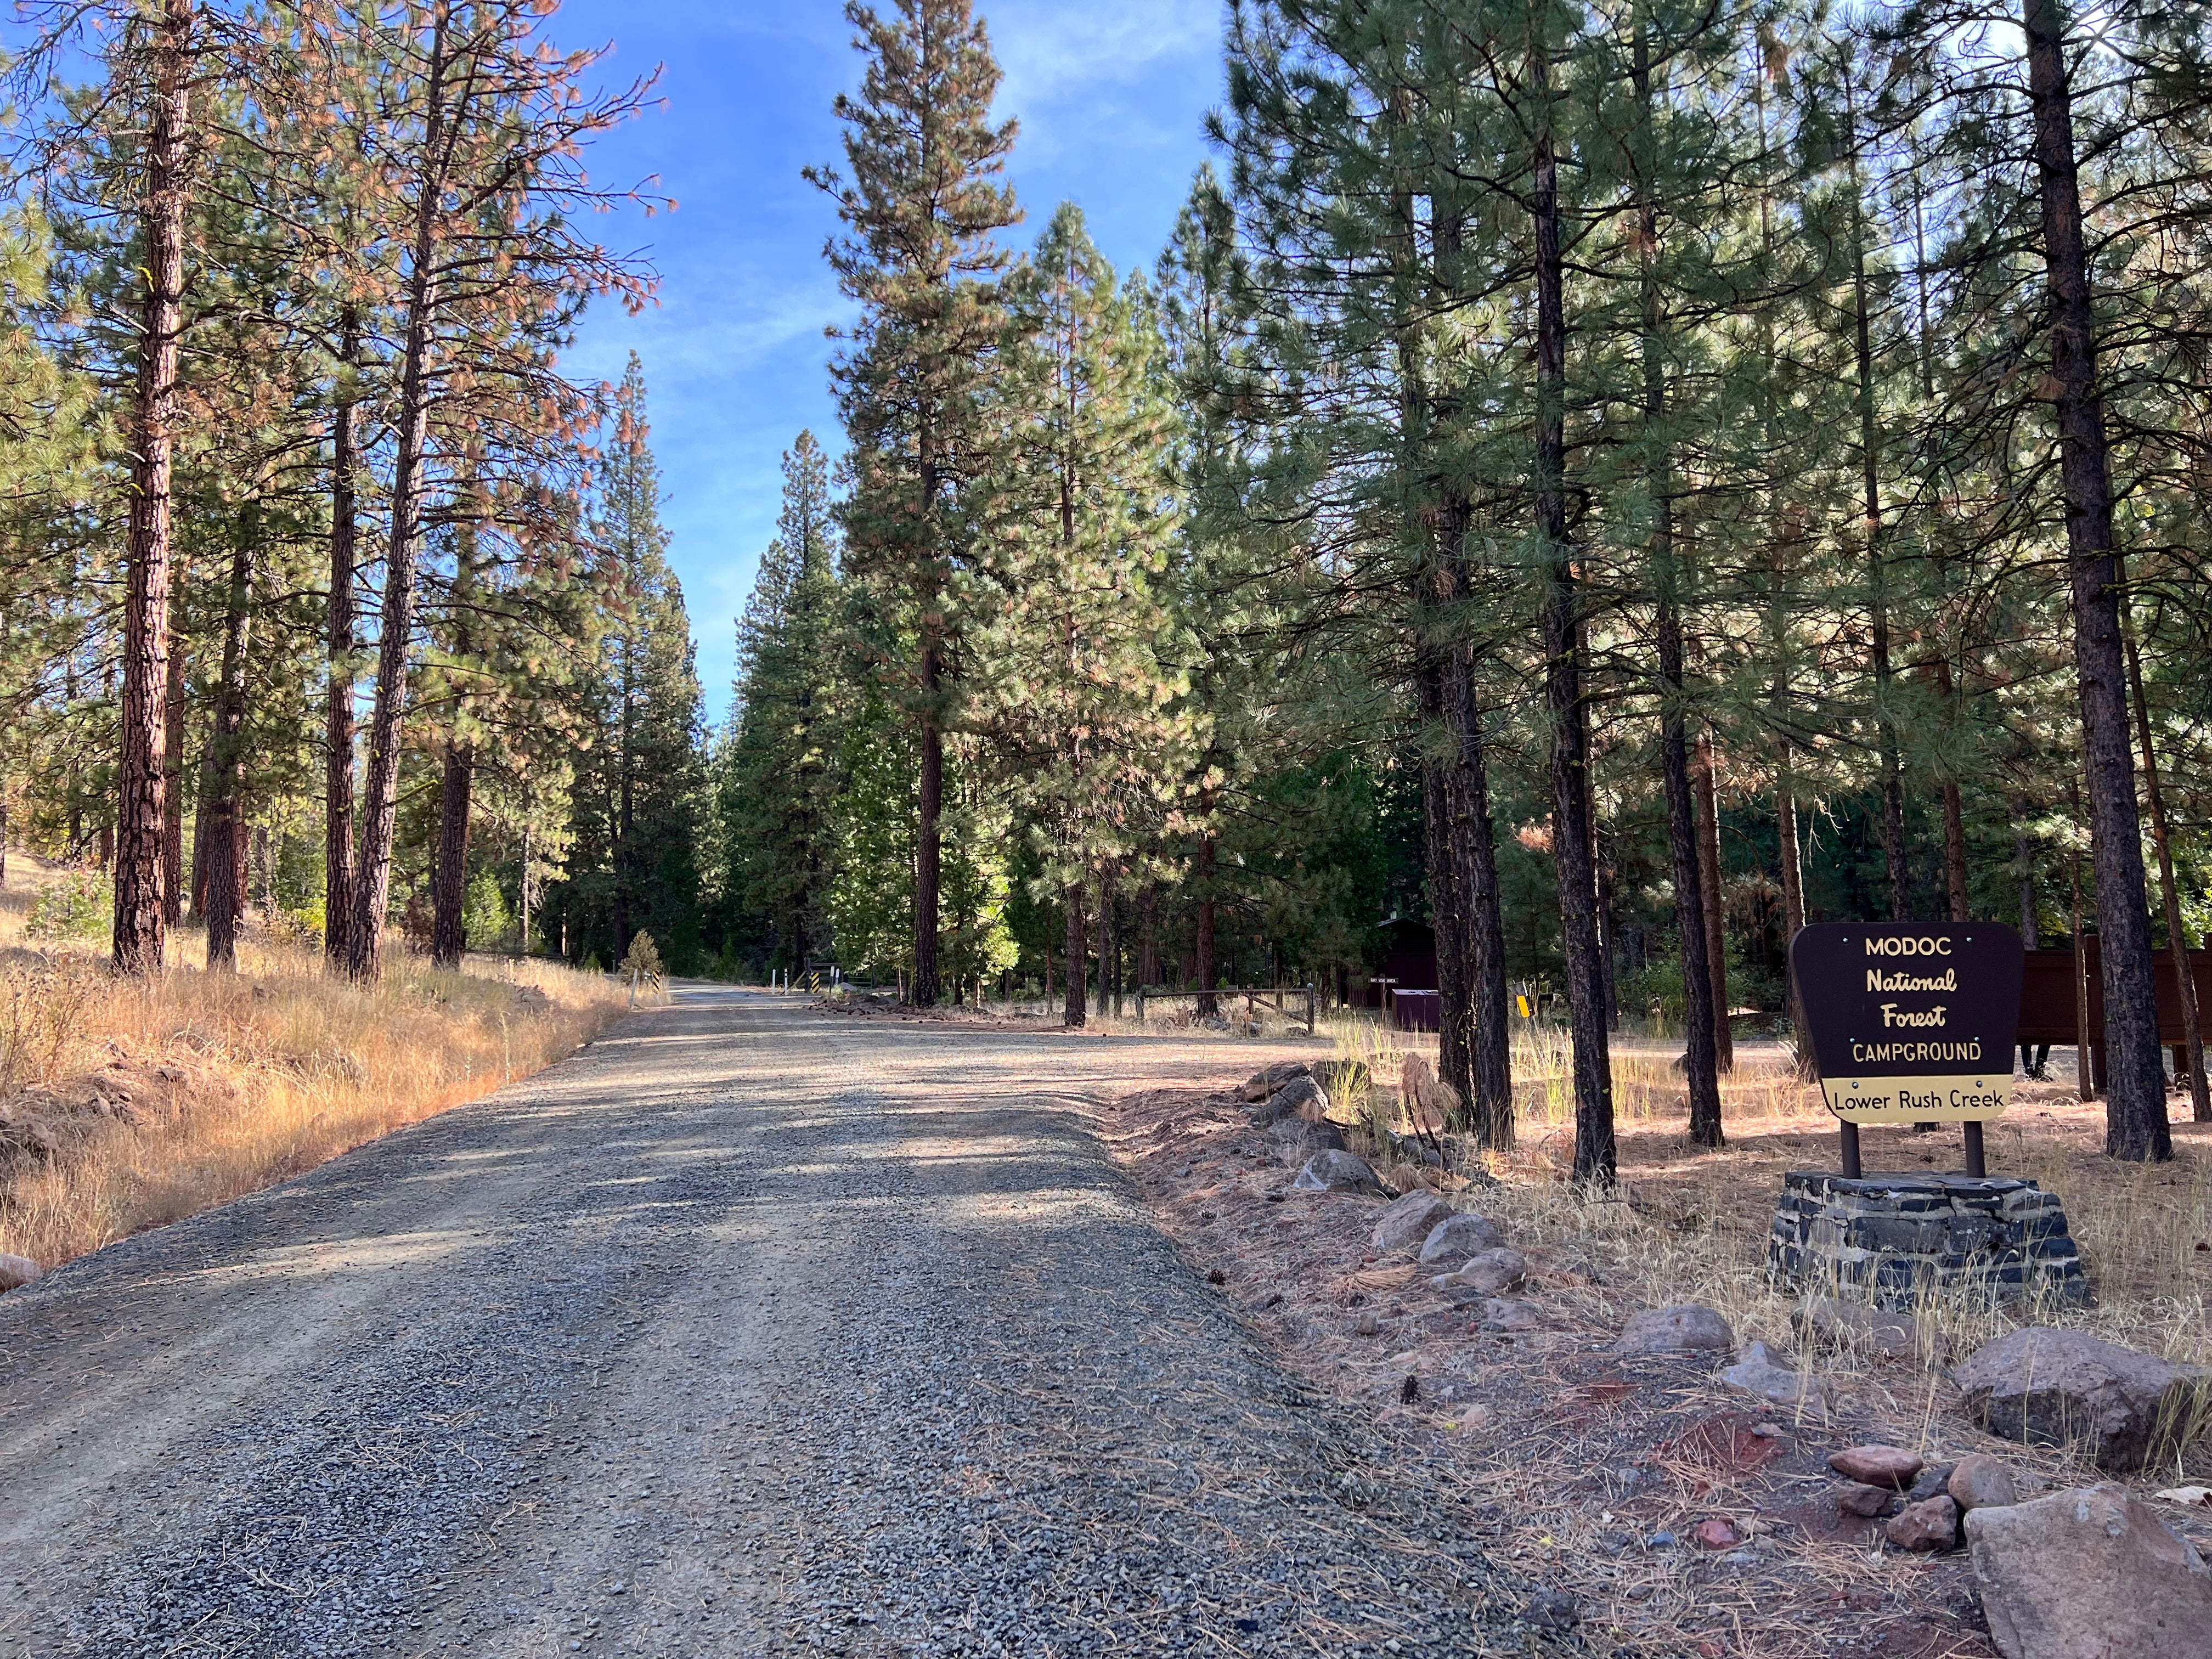 Camper submitted image from Lower Rush Creek Campground - 2